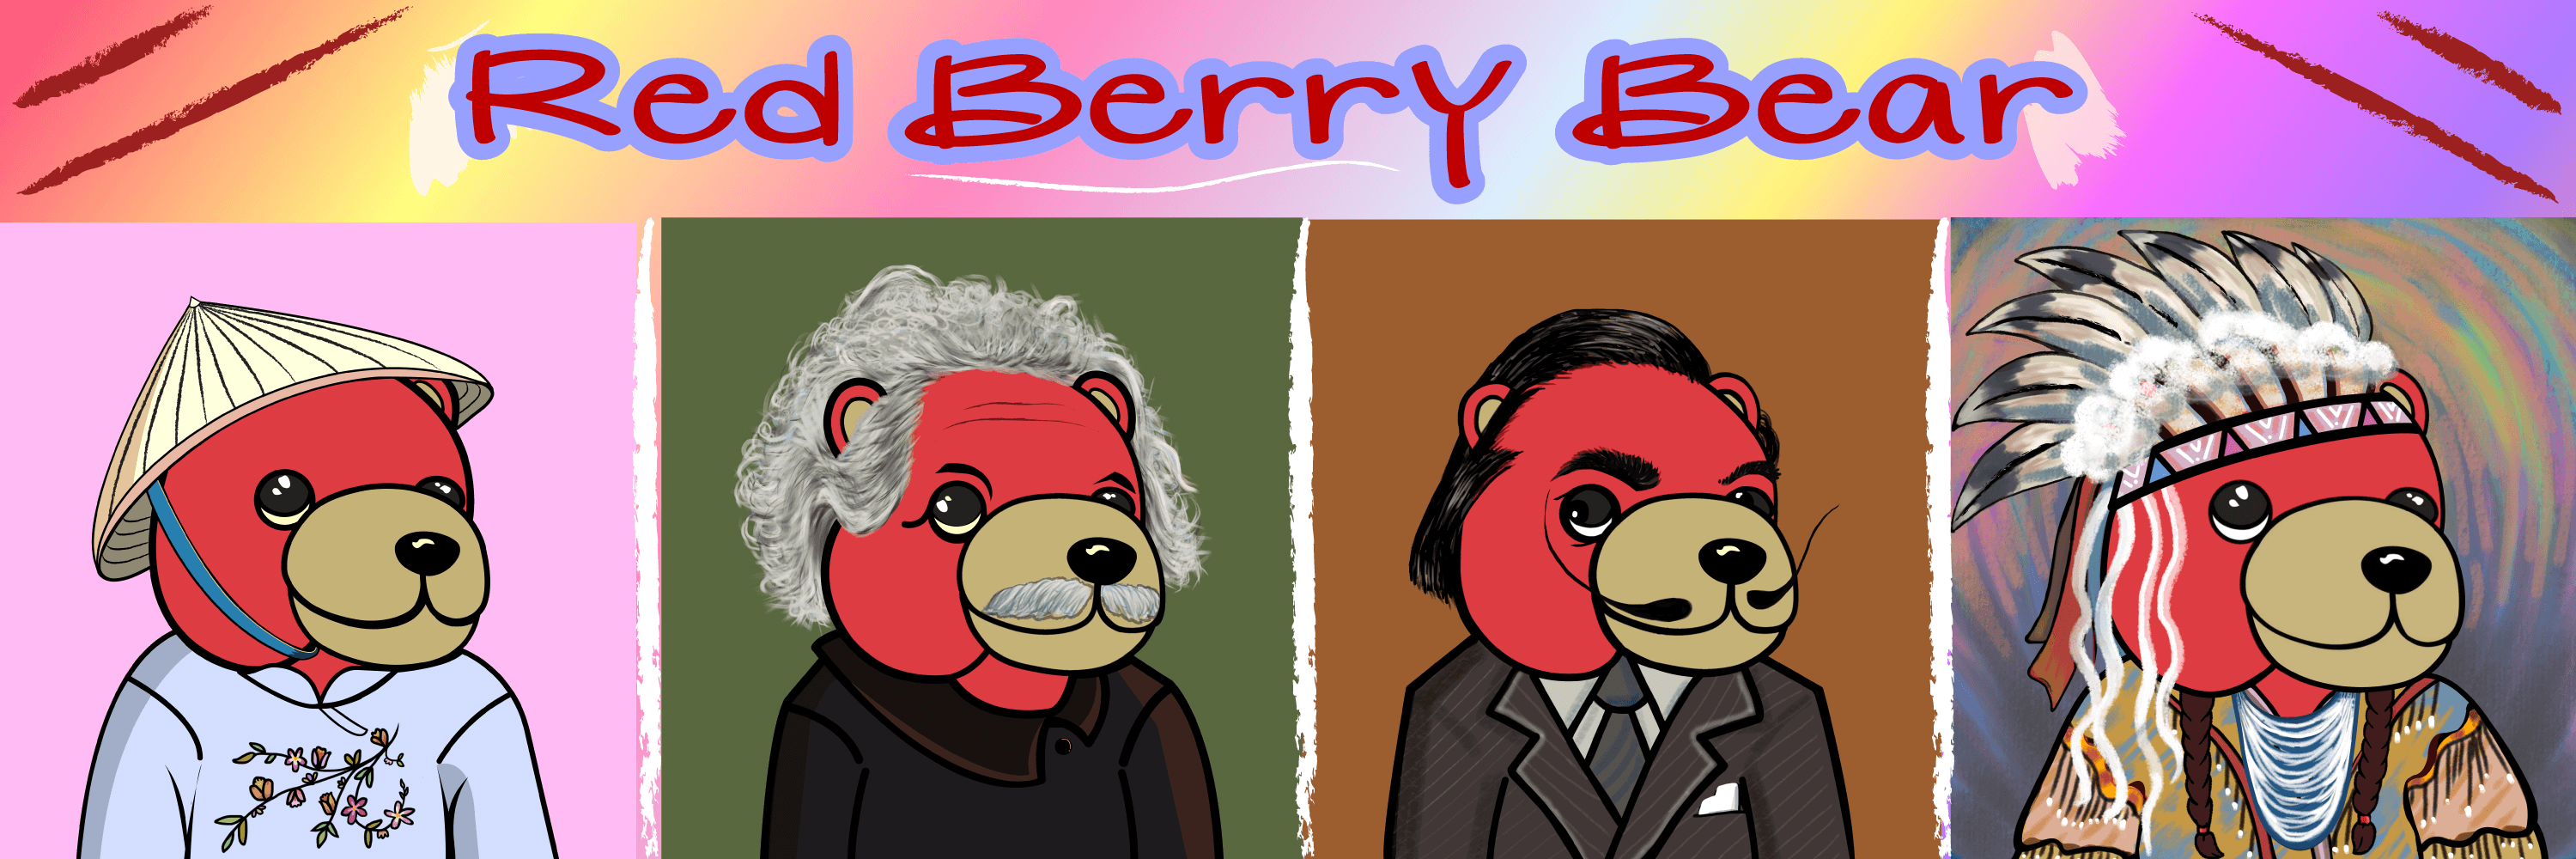 Red_Berry_Bear banner